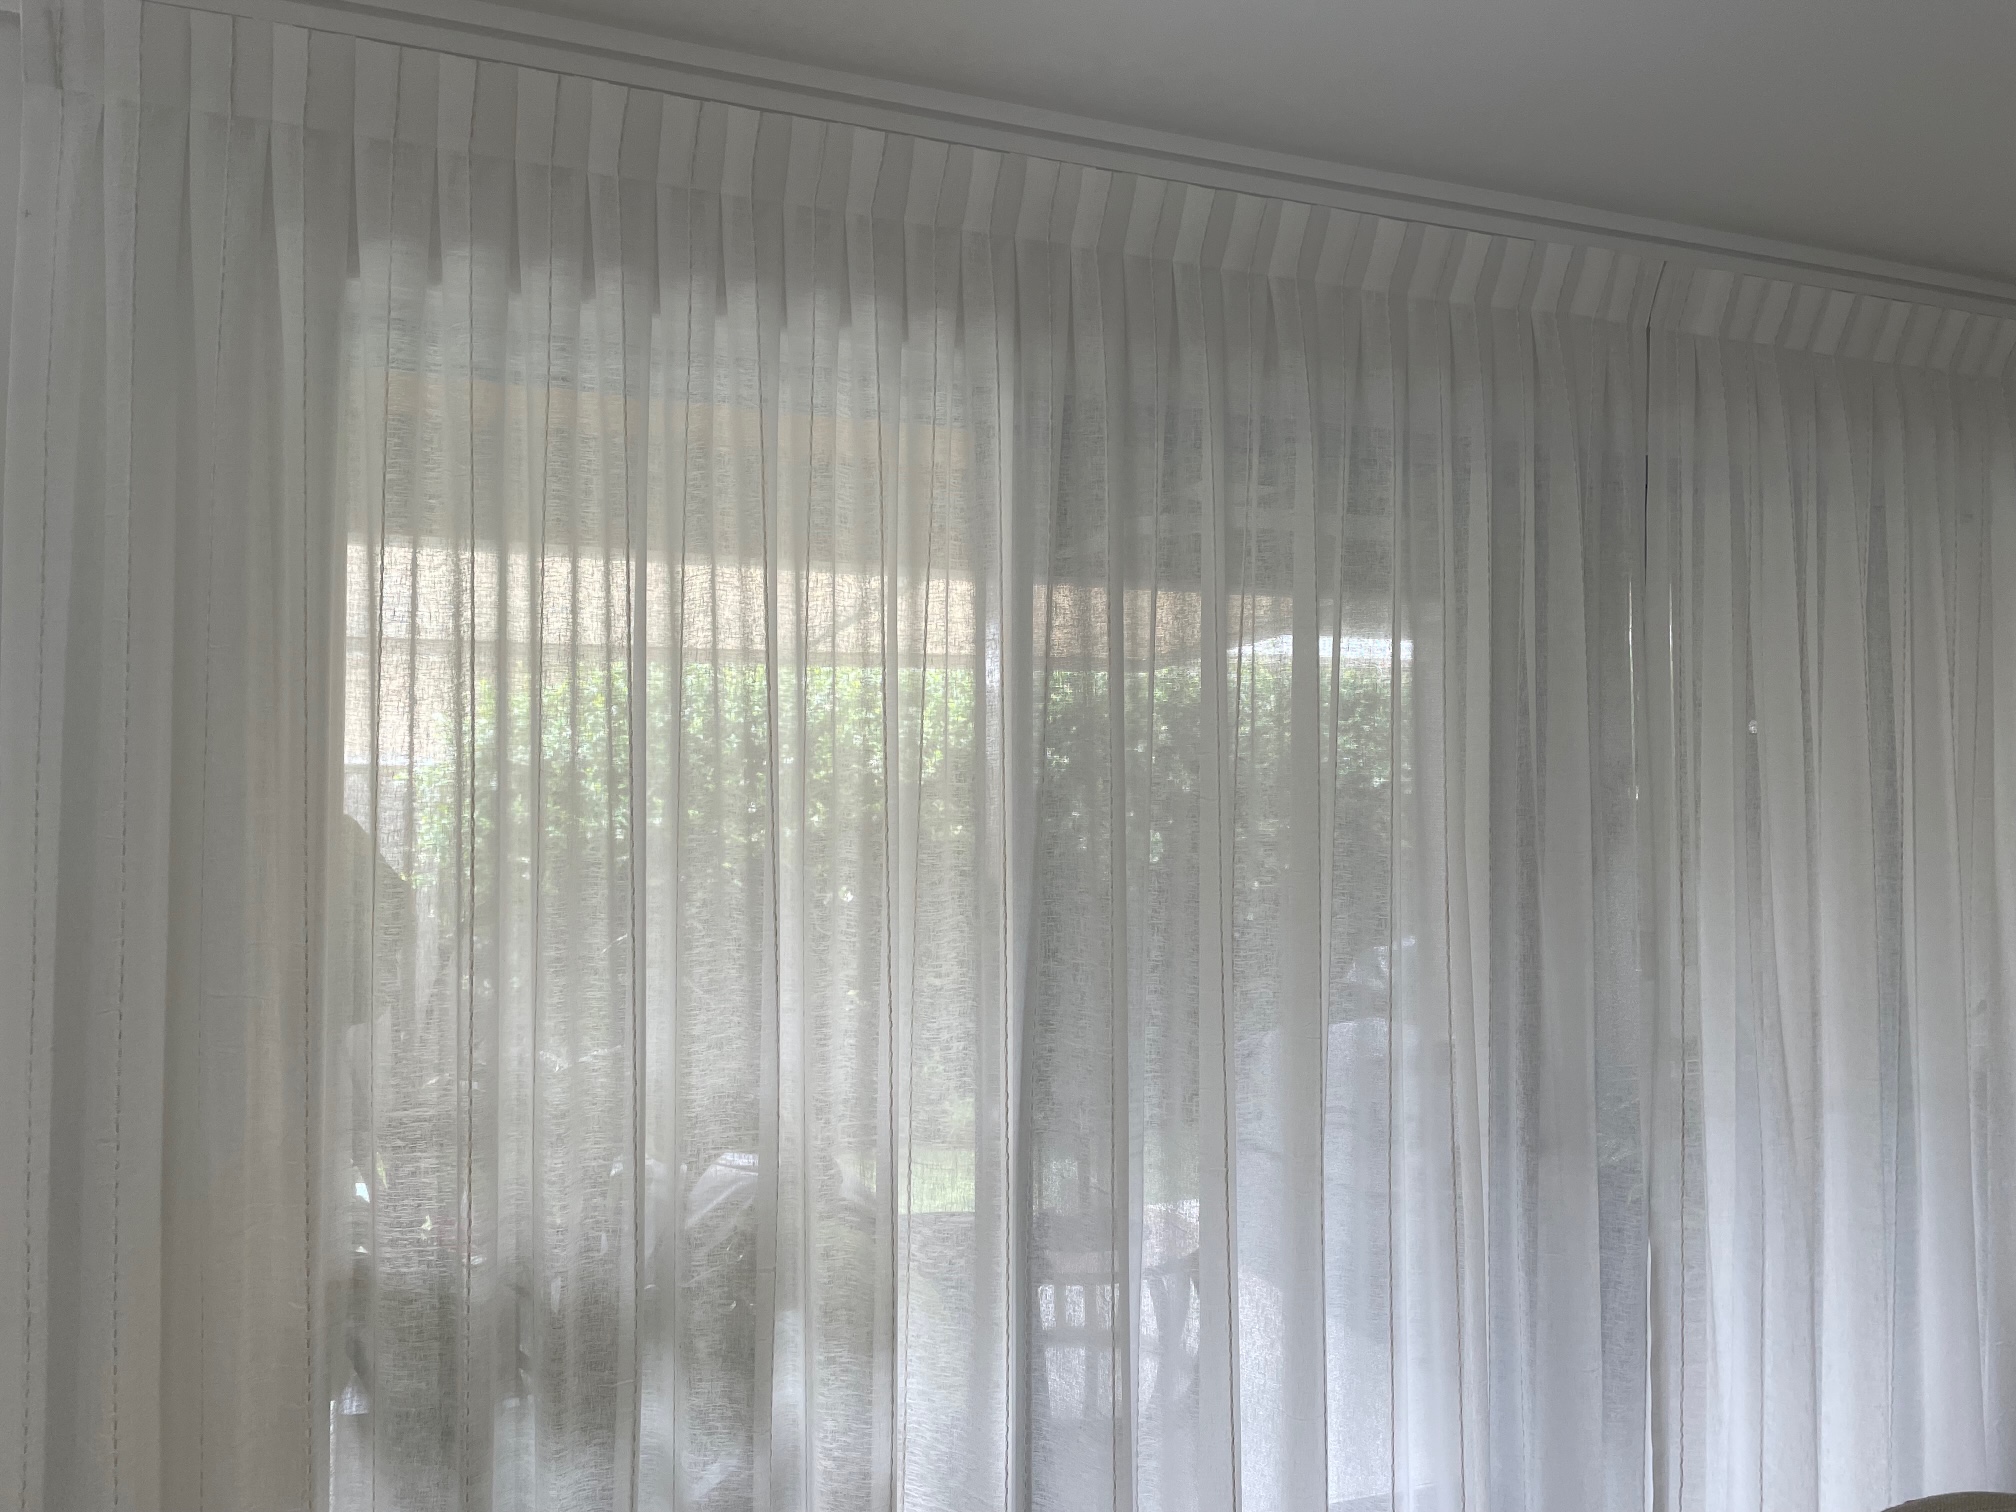 reverse pleat, box pleat, pleated, sheers, curtains, drapes, stripes, linen-look